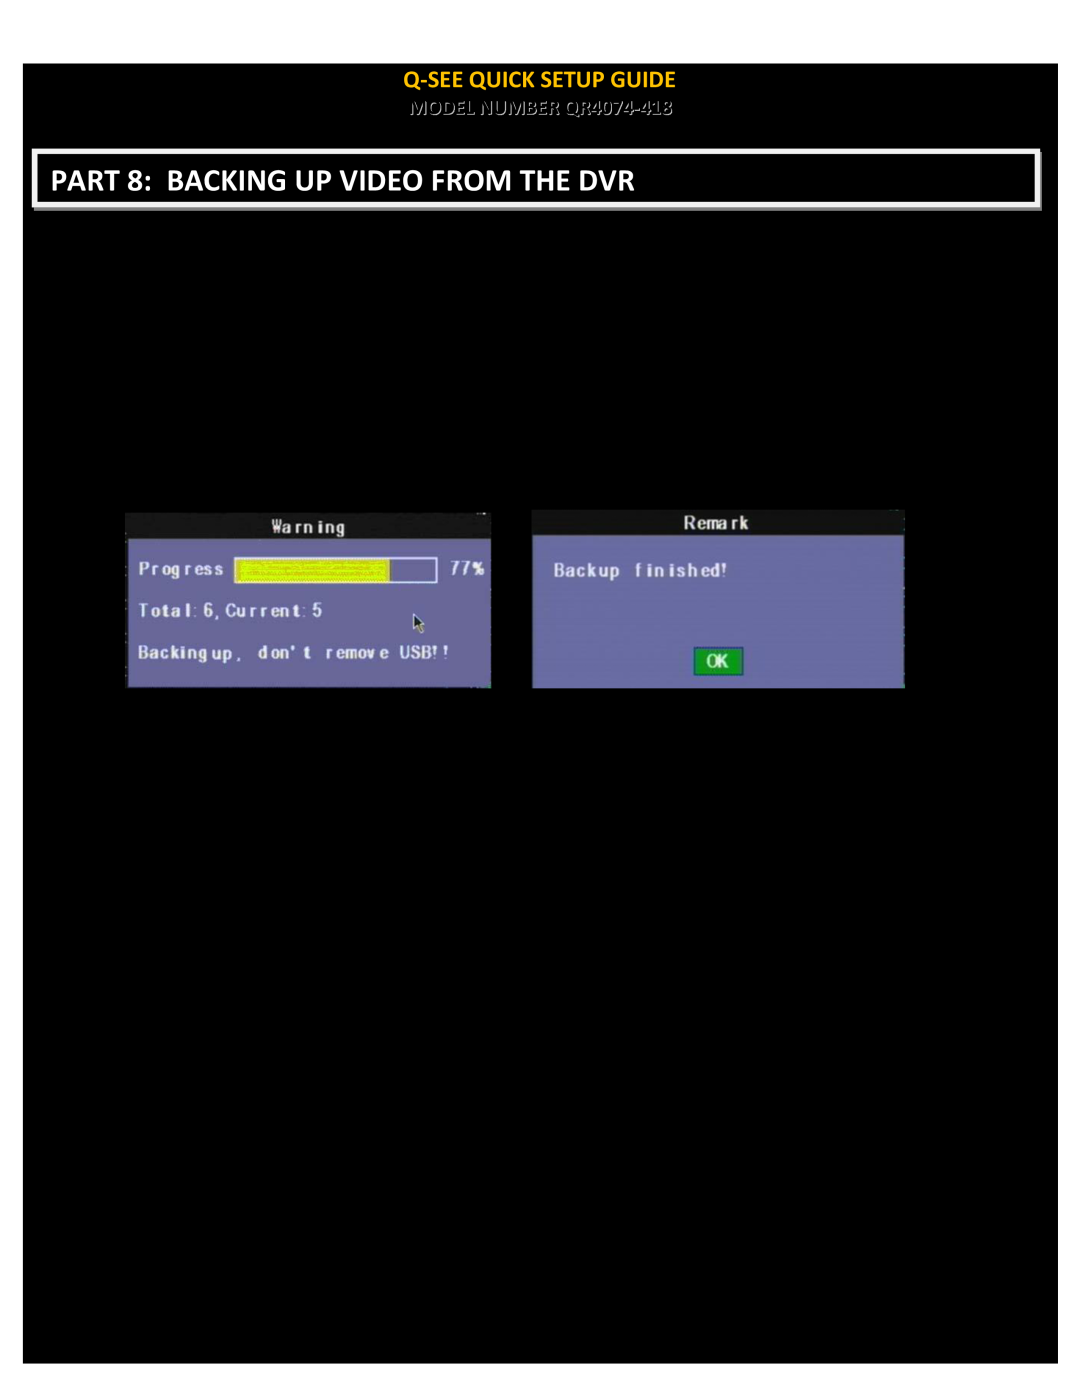 Q-See setup guide PART 8 BACKING UP VIDEO FROM THE DVR, Q-Seequick Setup Guide, MODEL NUMBER QR4074-418, P a g e 